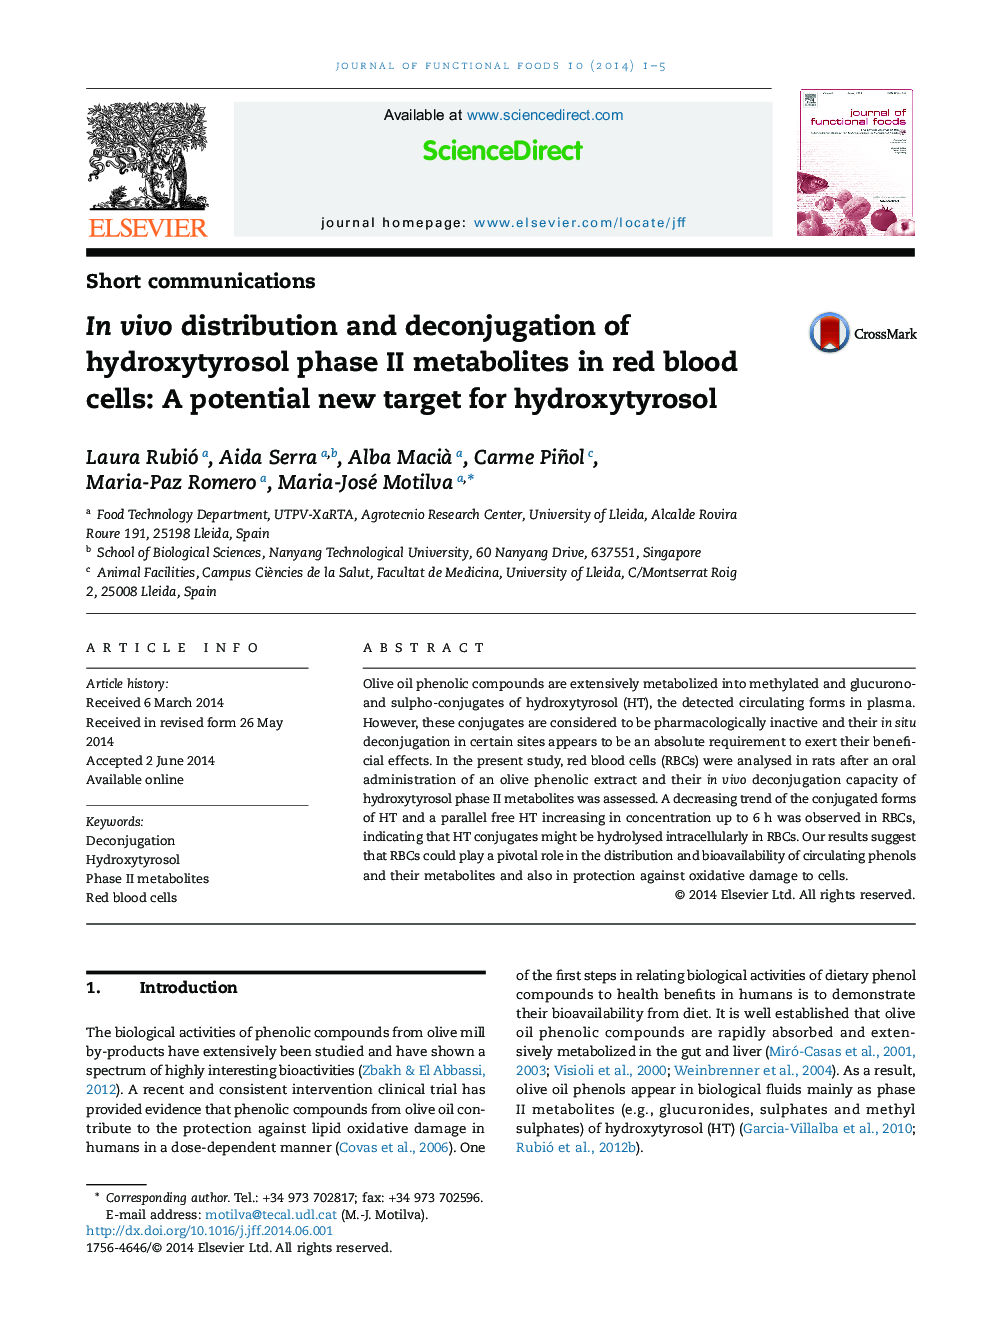 In vivo distribution and deconjugation of hydroxytyrosol phase II metabolites in red blood cells: A potential new target for hydroxytyrosol